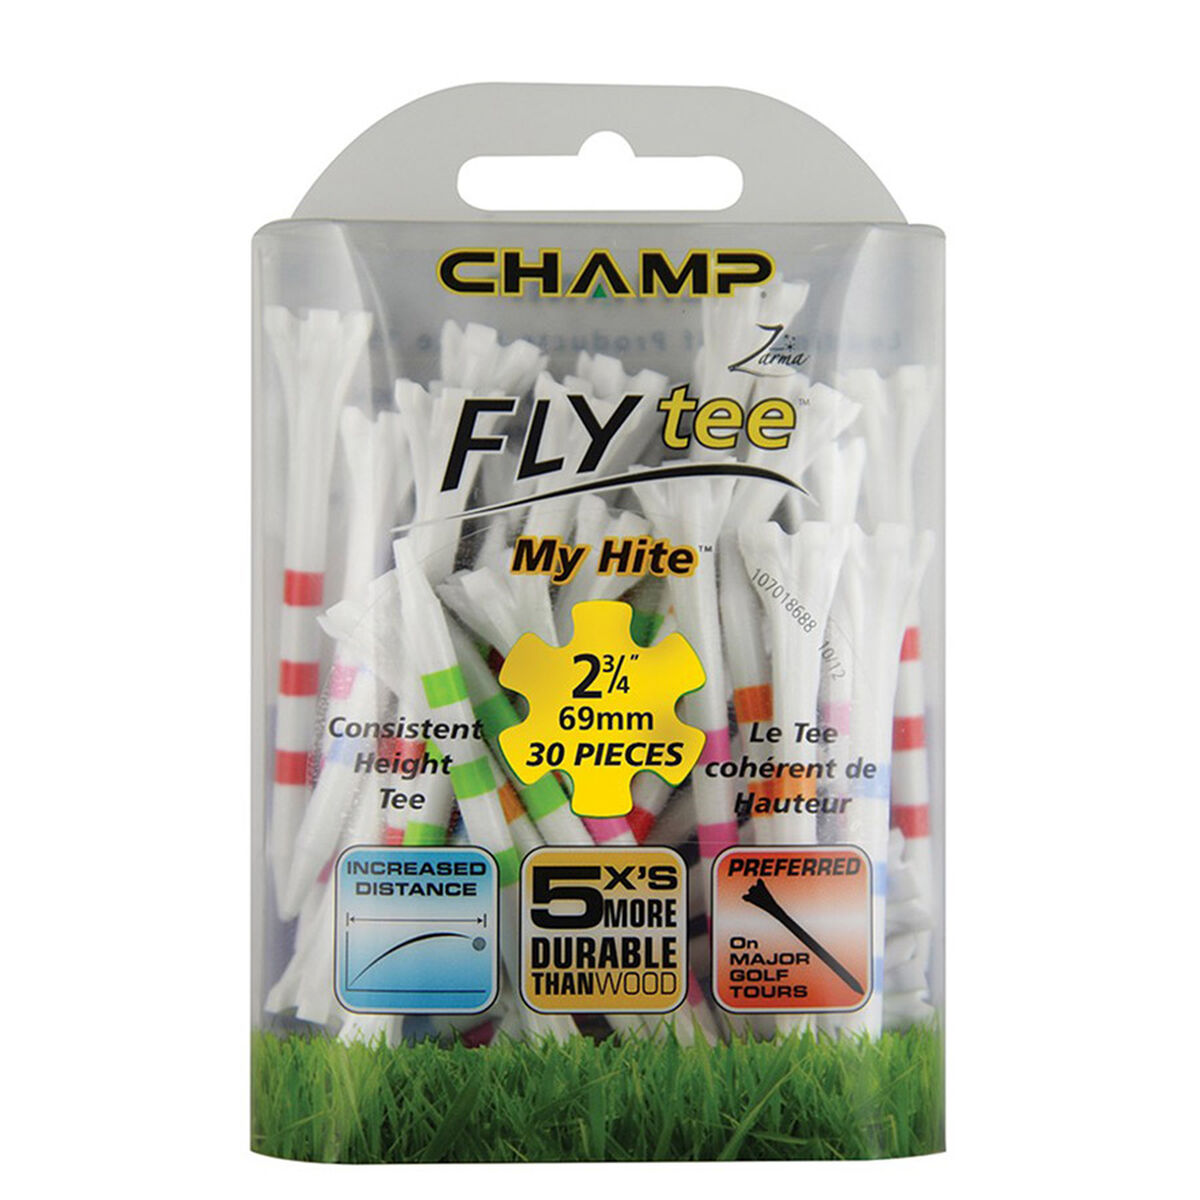 Champ MyHite Fly 69mm Golf Tees - 30 Pack, Mens, Tees, White, 69mm | American Golf von CHAMP